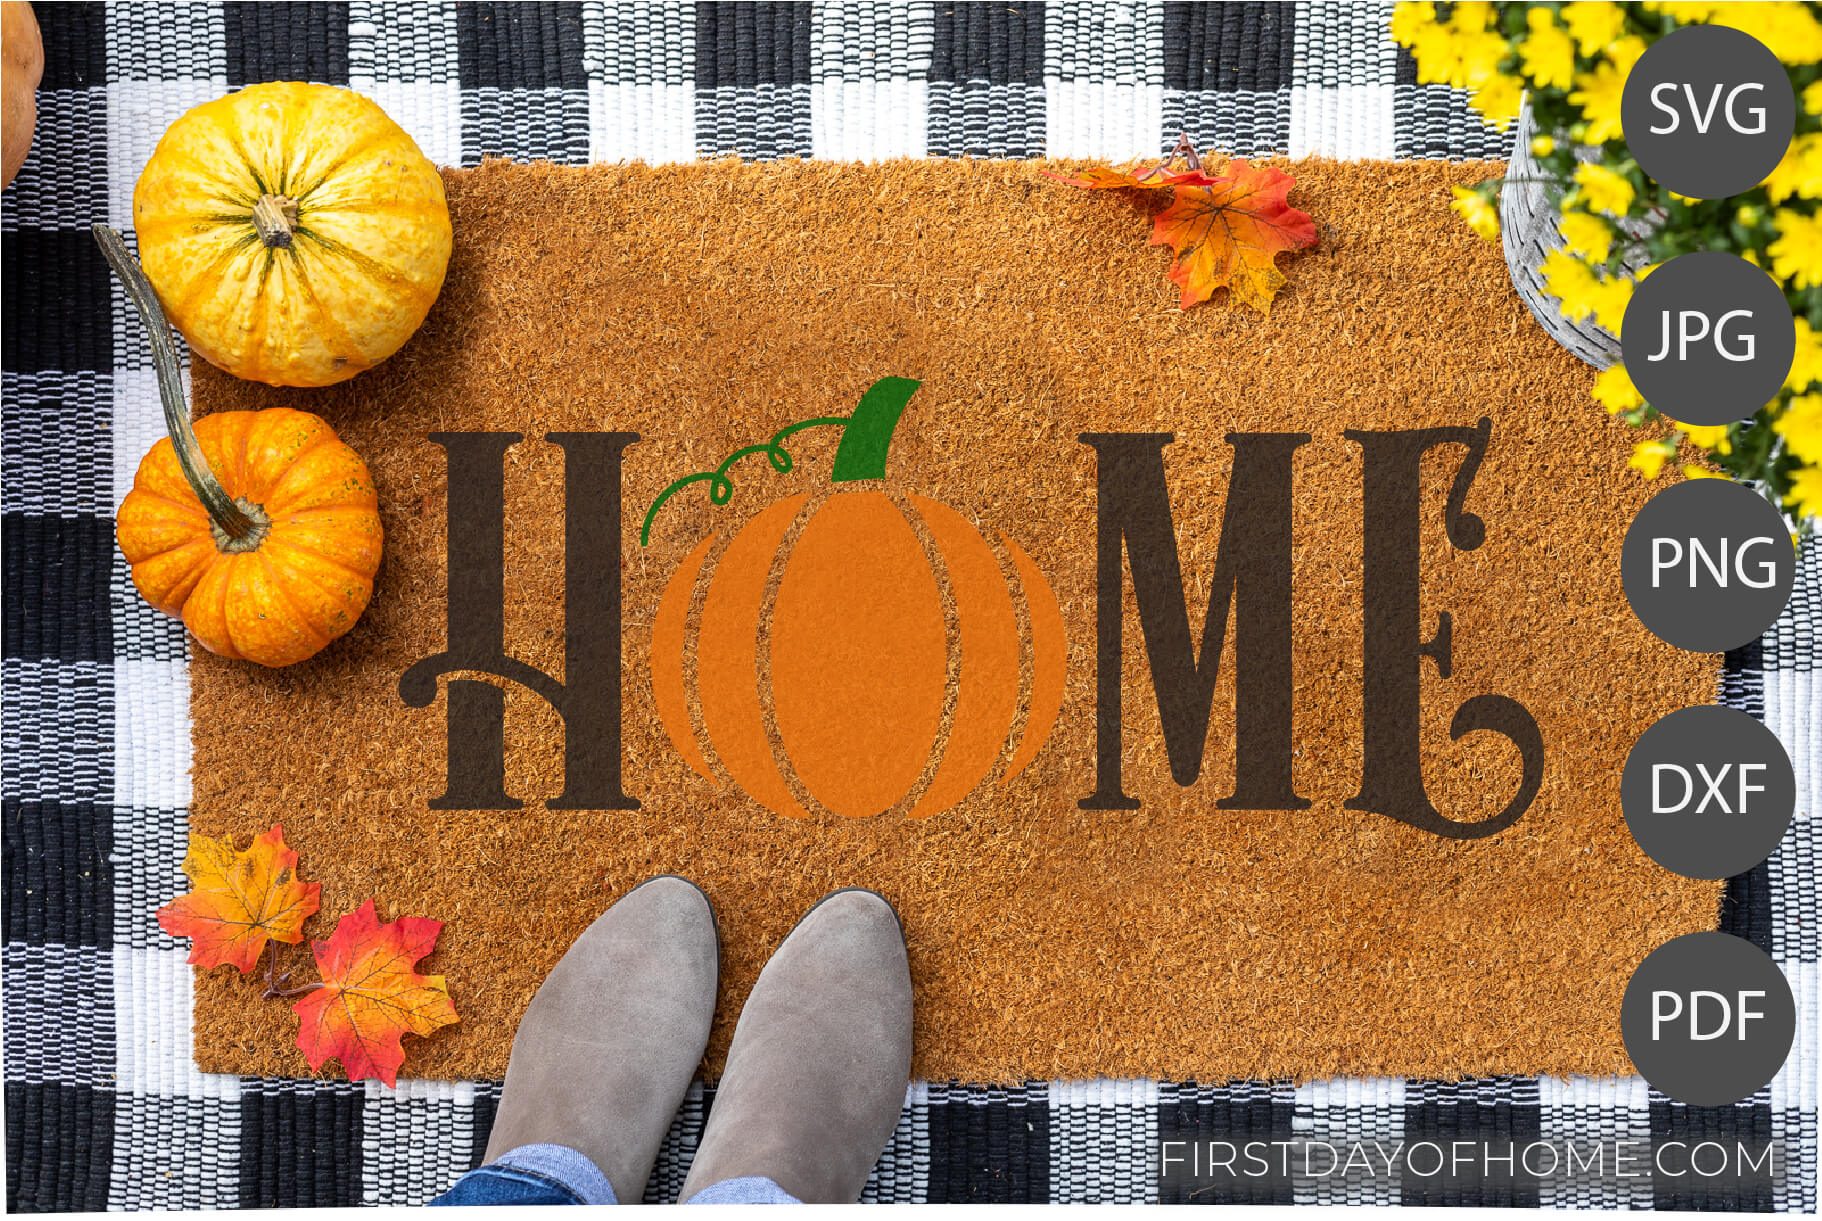 Mockup example of Home fall doormat with pumpkin for "o" using digital files. Lists digital files as SVG, JPG, PNG, DXF and PDF